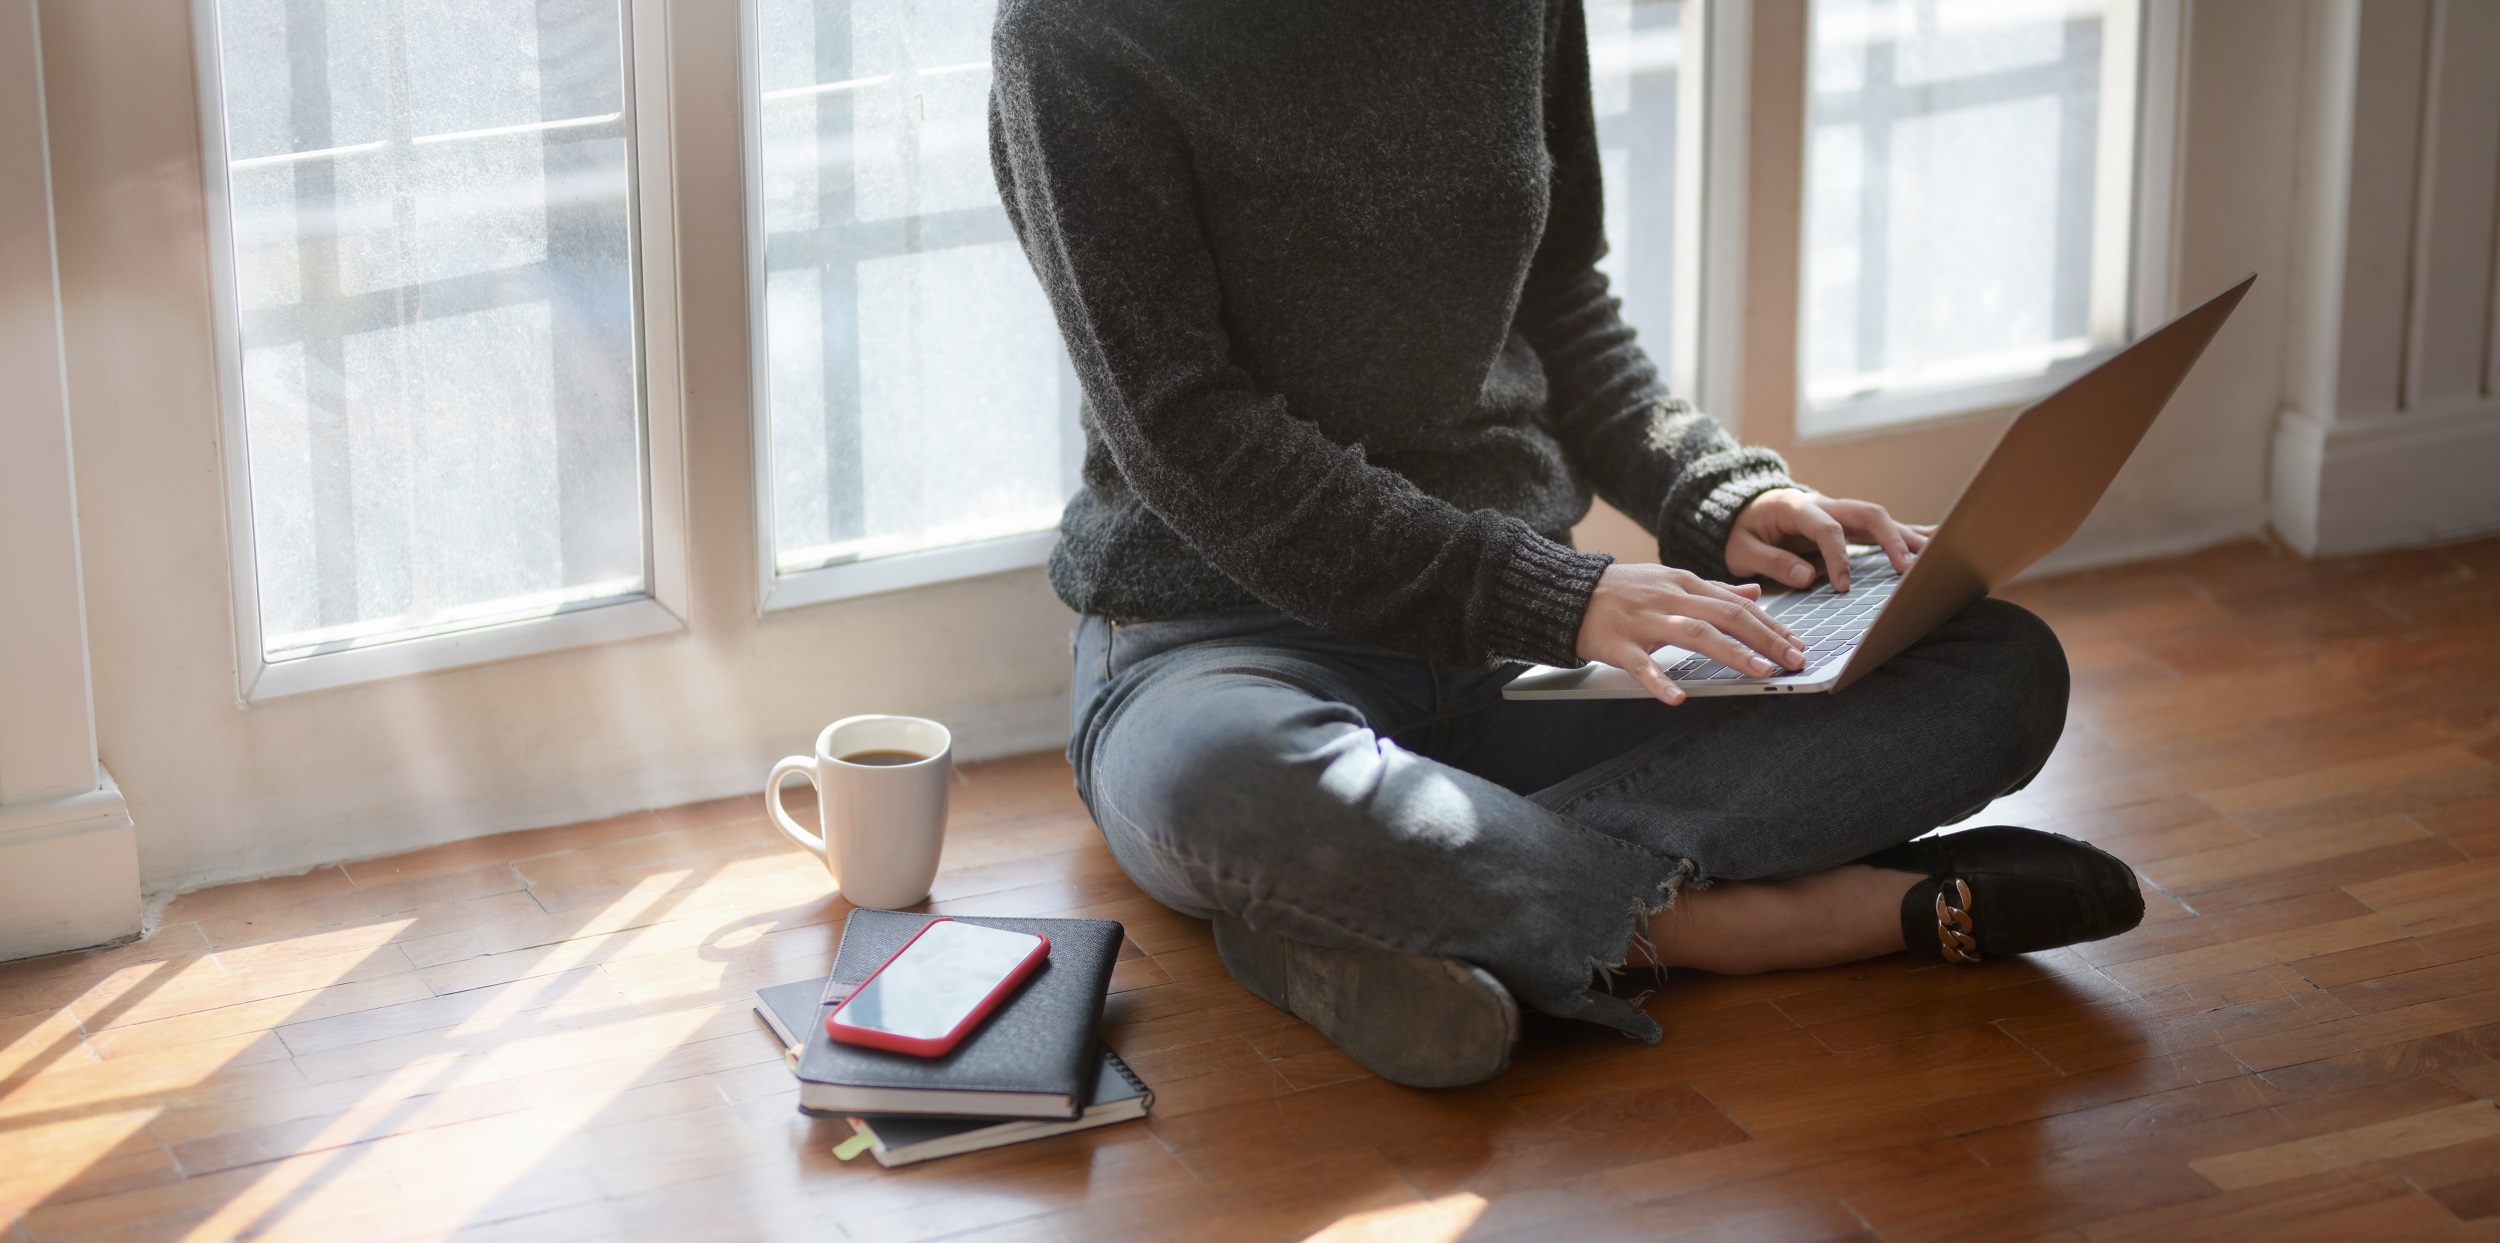 12 Creative Rituals to make the most out of working from home